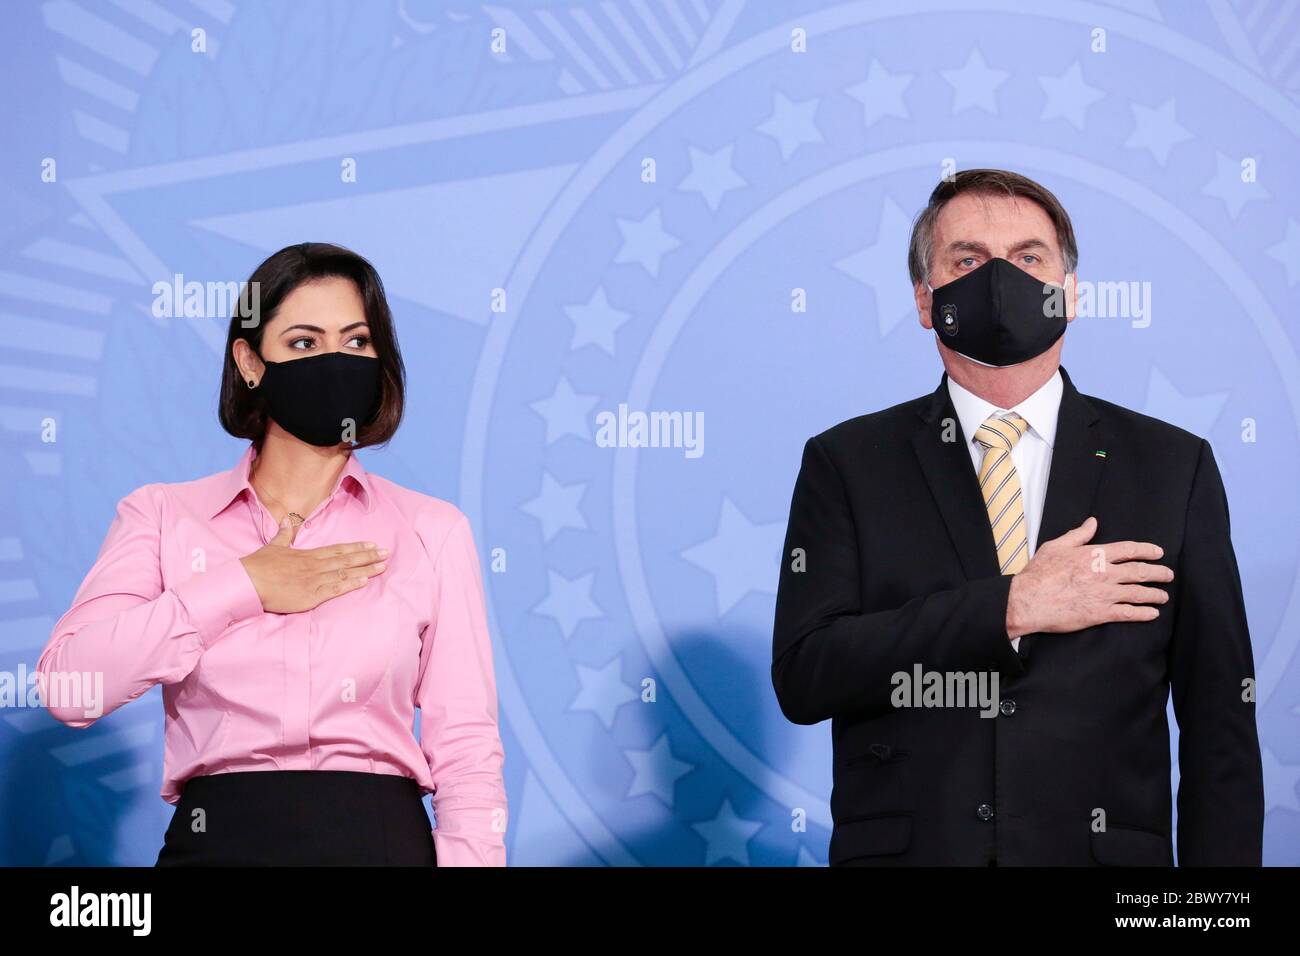 Brazilian President Jair Bolsonaro and first lady Michelle Bolsonaro, both wearing masks amid the COVID-19 pandemic, during an event promoting a government campaign against domestic violence at Planalto presidential palace May 15, 2020 in Brasilia, Brazil. Stock Photo